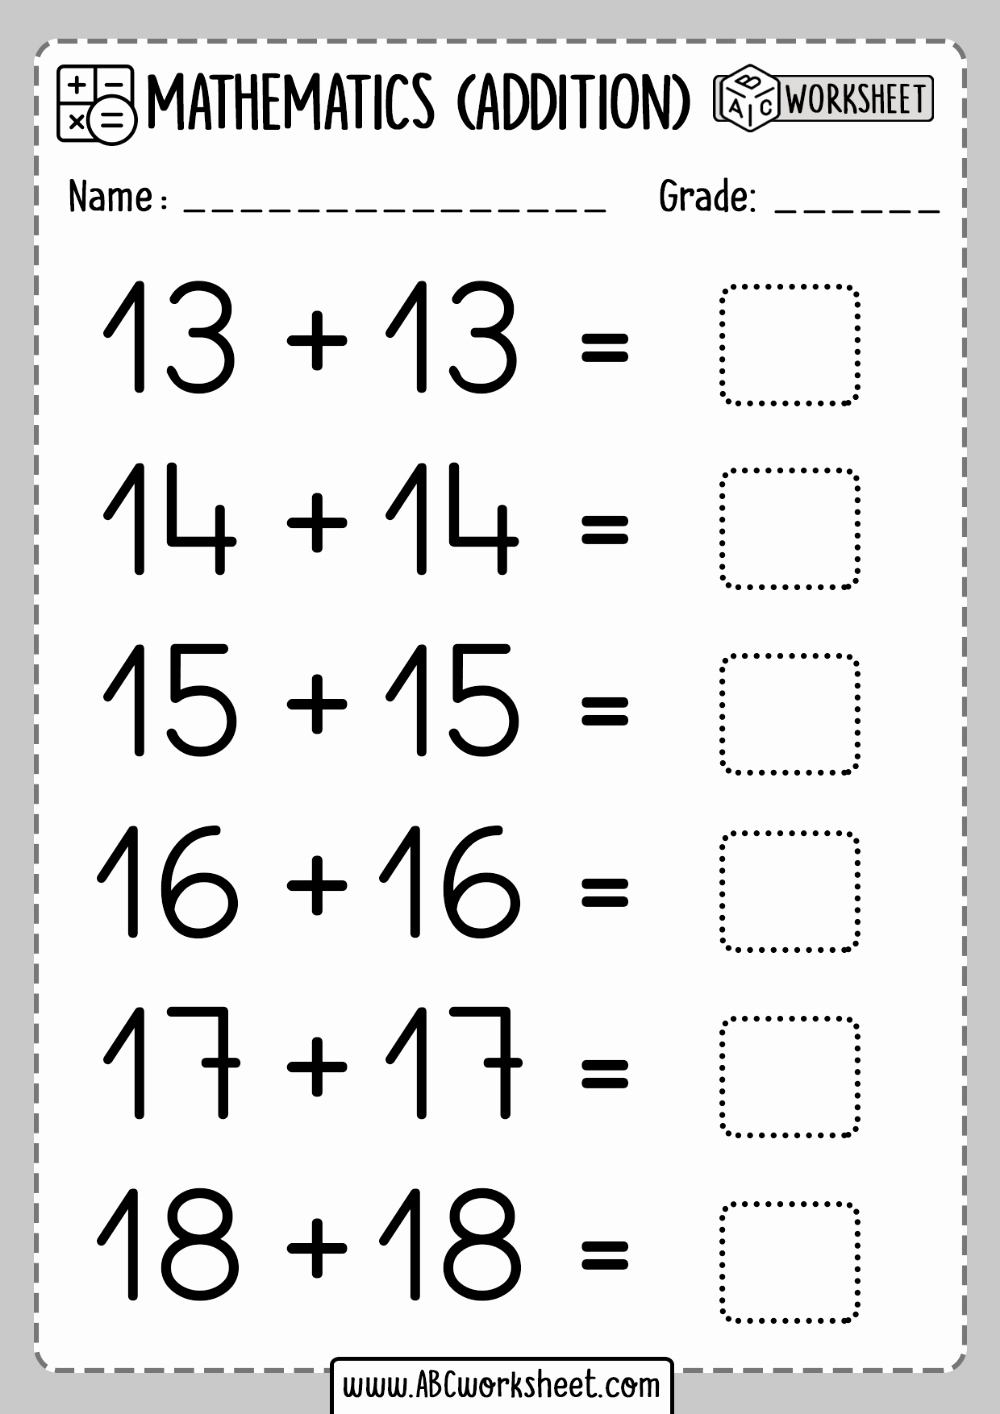 Doubles Addition Worksheet Beautiful Adding Doubles Worksheet In 2020